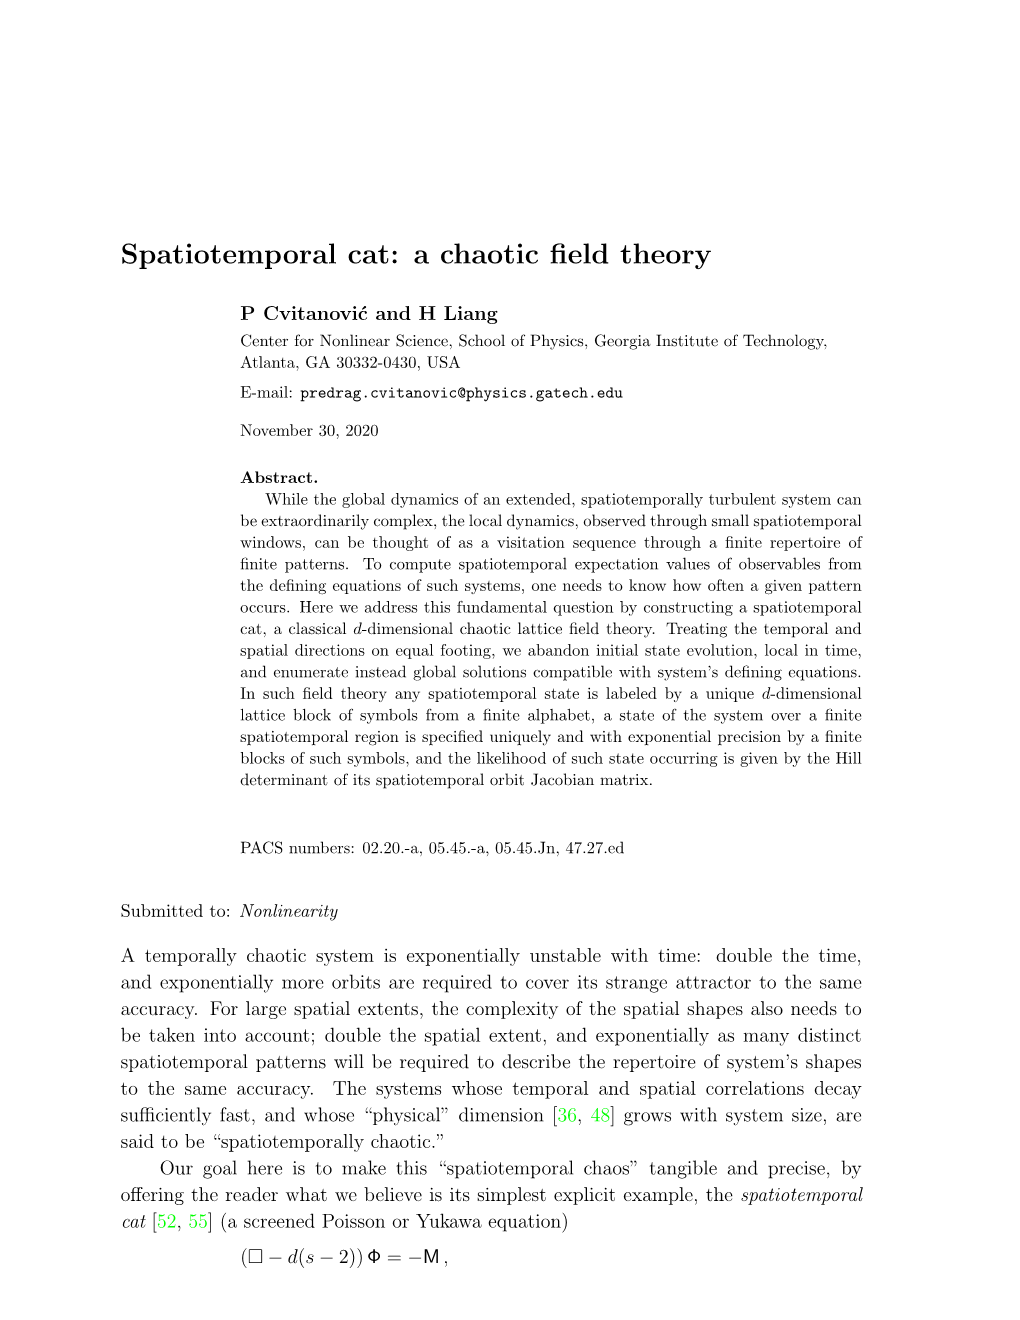 Spatiotemporal Cat: a Chaotic Field Theory